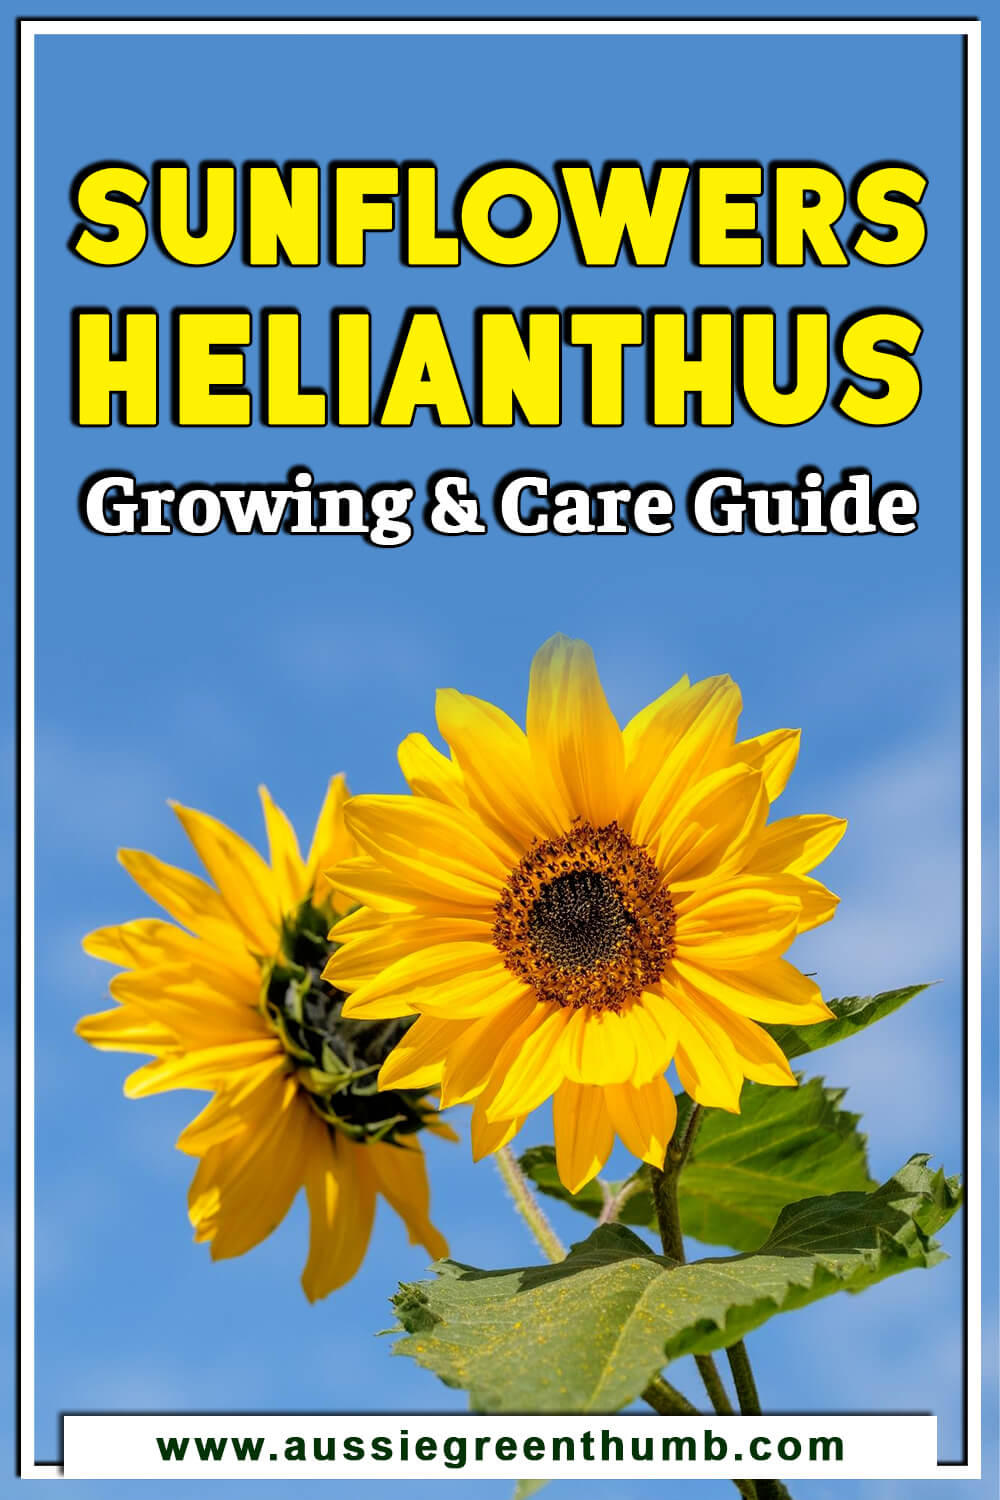 Sunflowers – Helianthus Growing and Care Guide